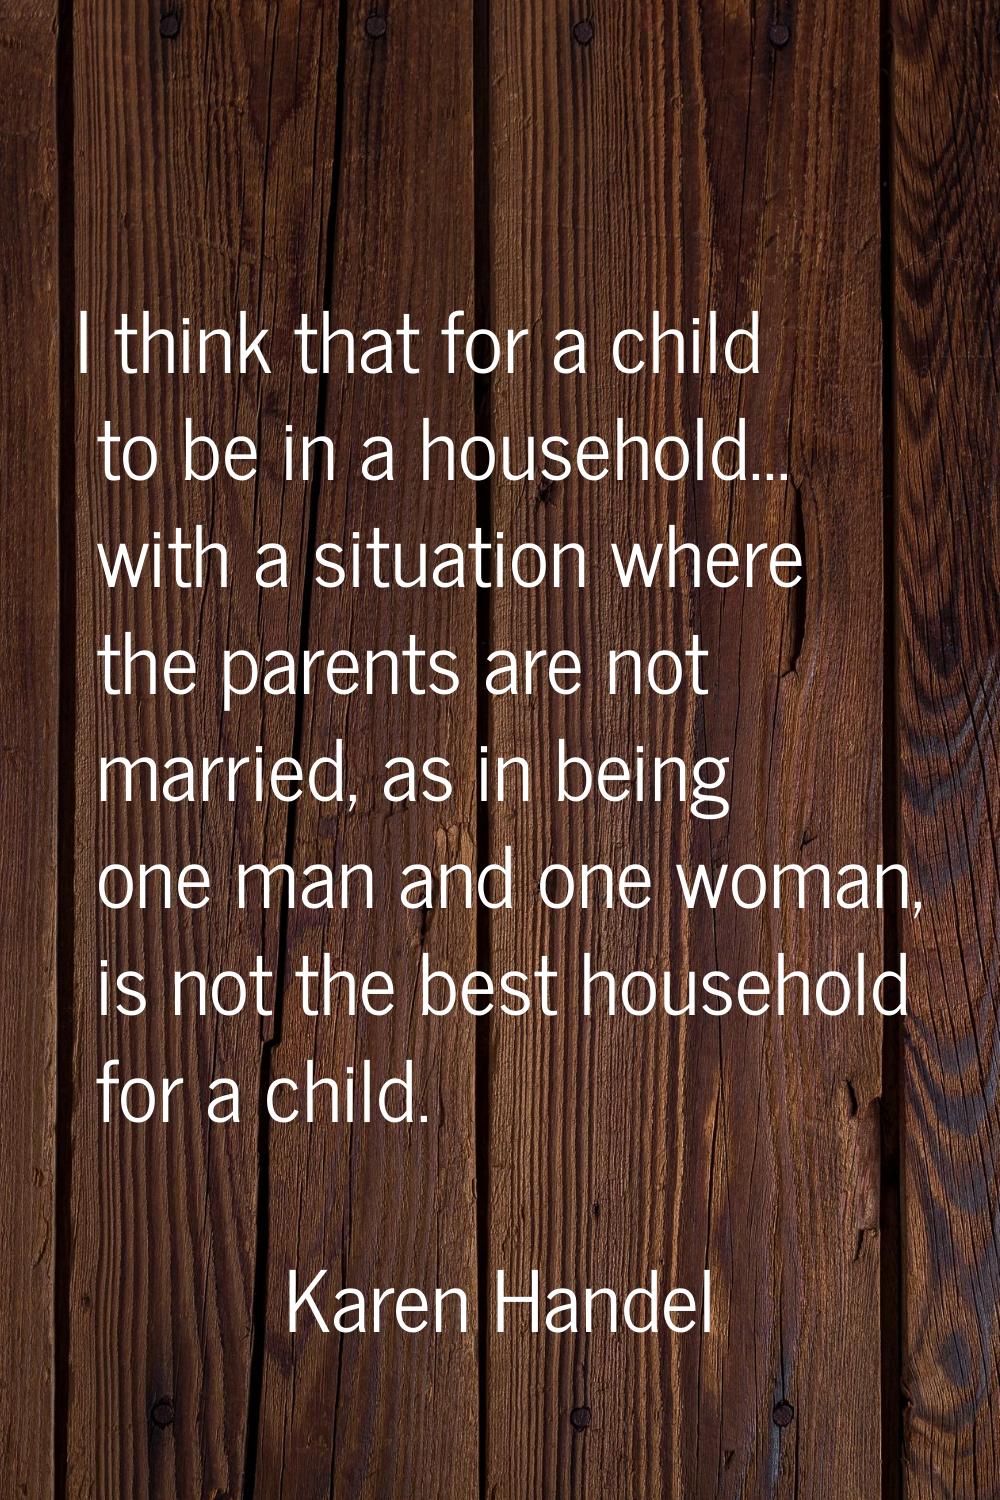 I think that for a child to be in a household... with a situation where the parents are not married